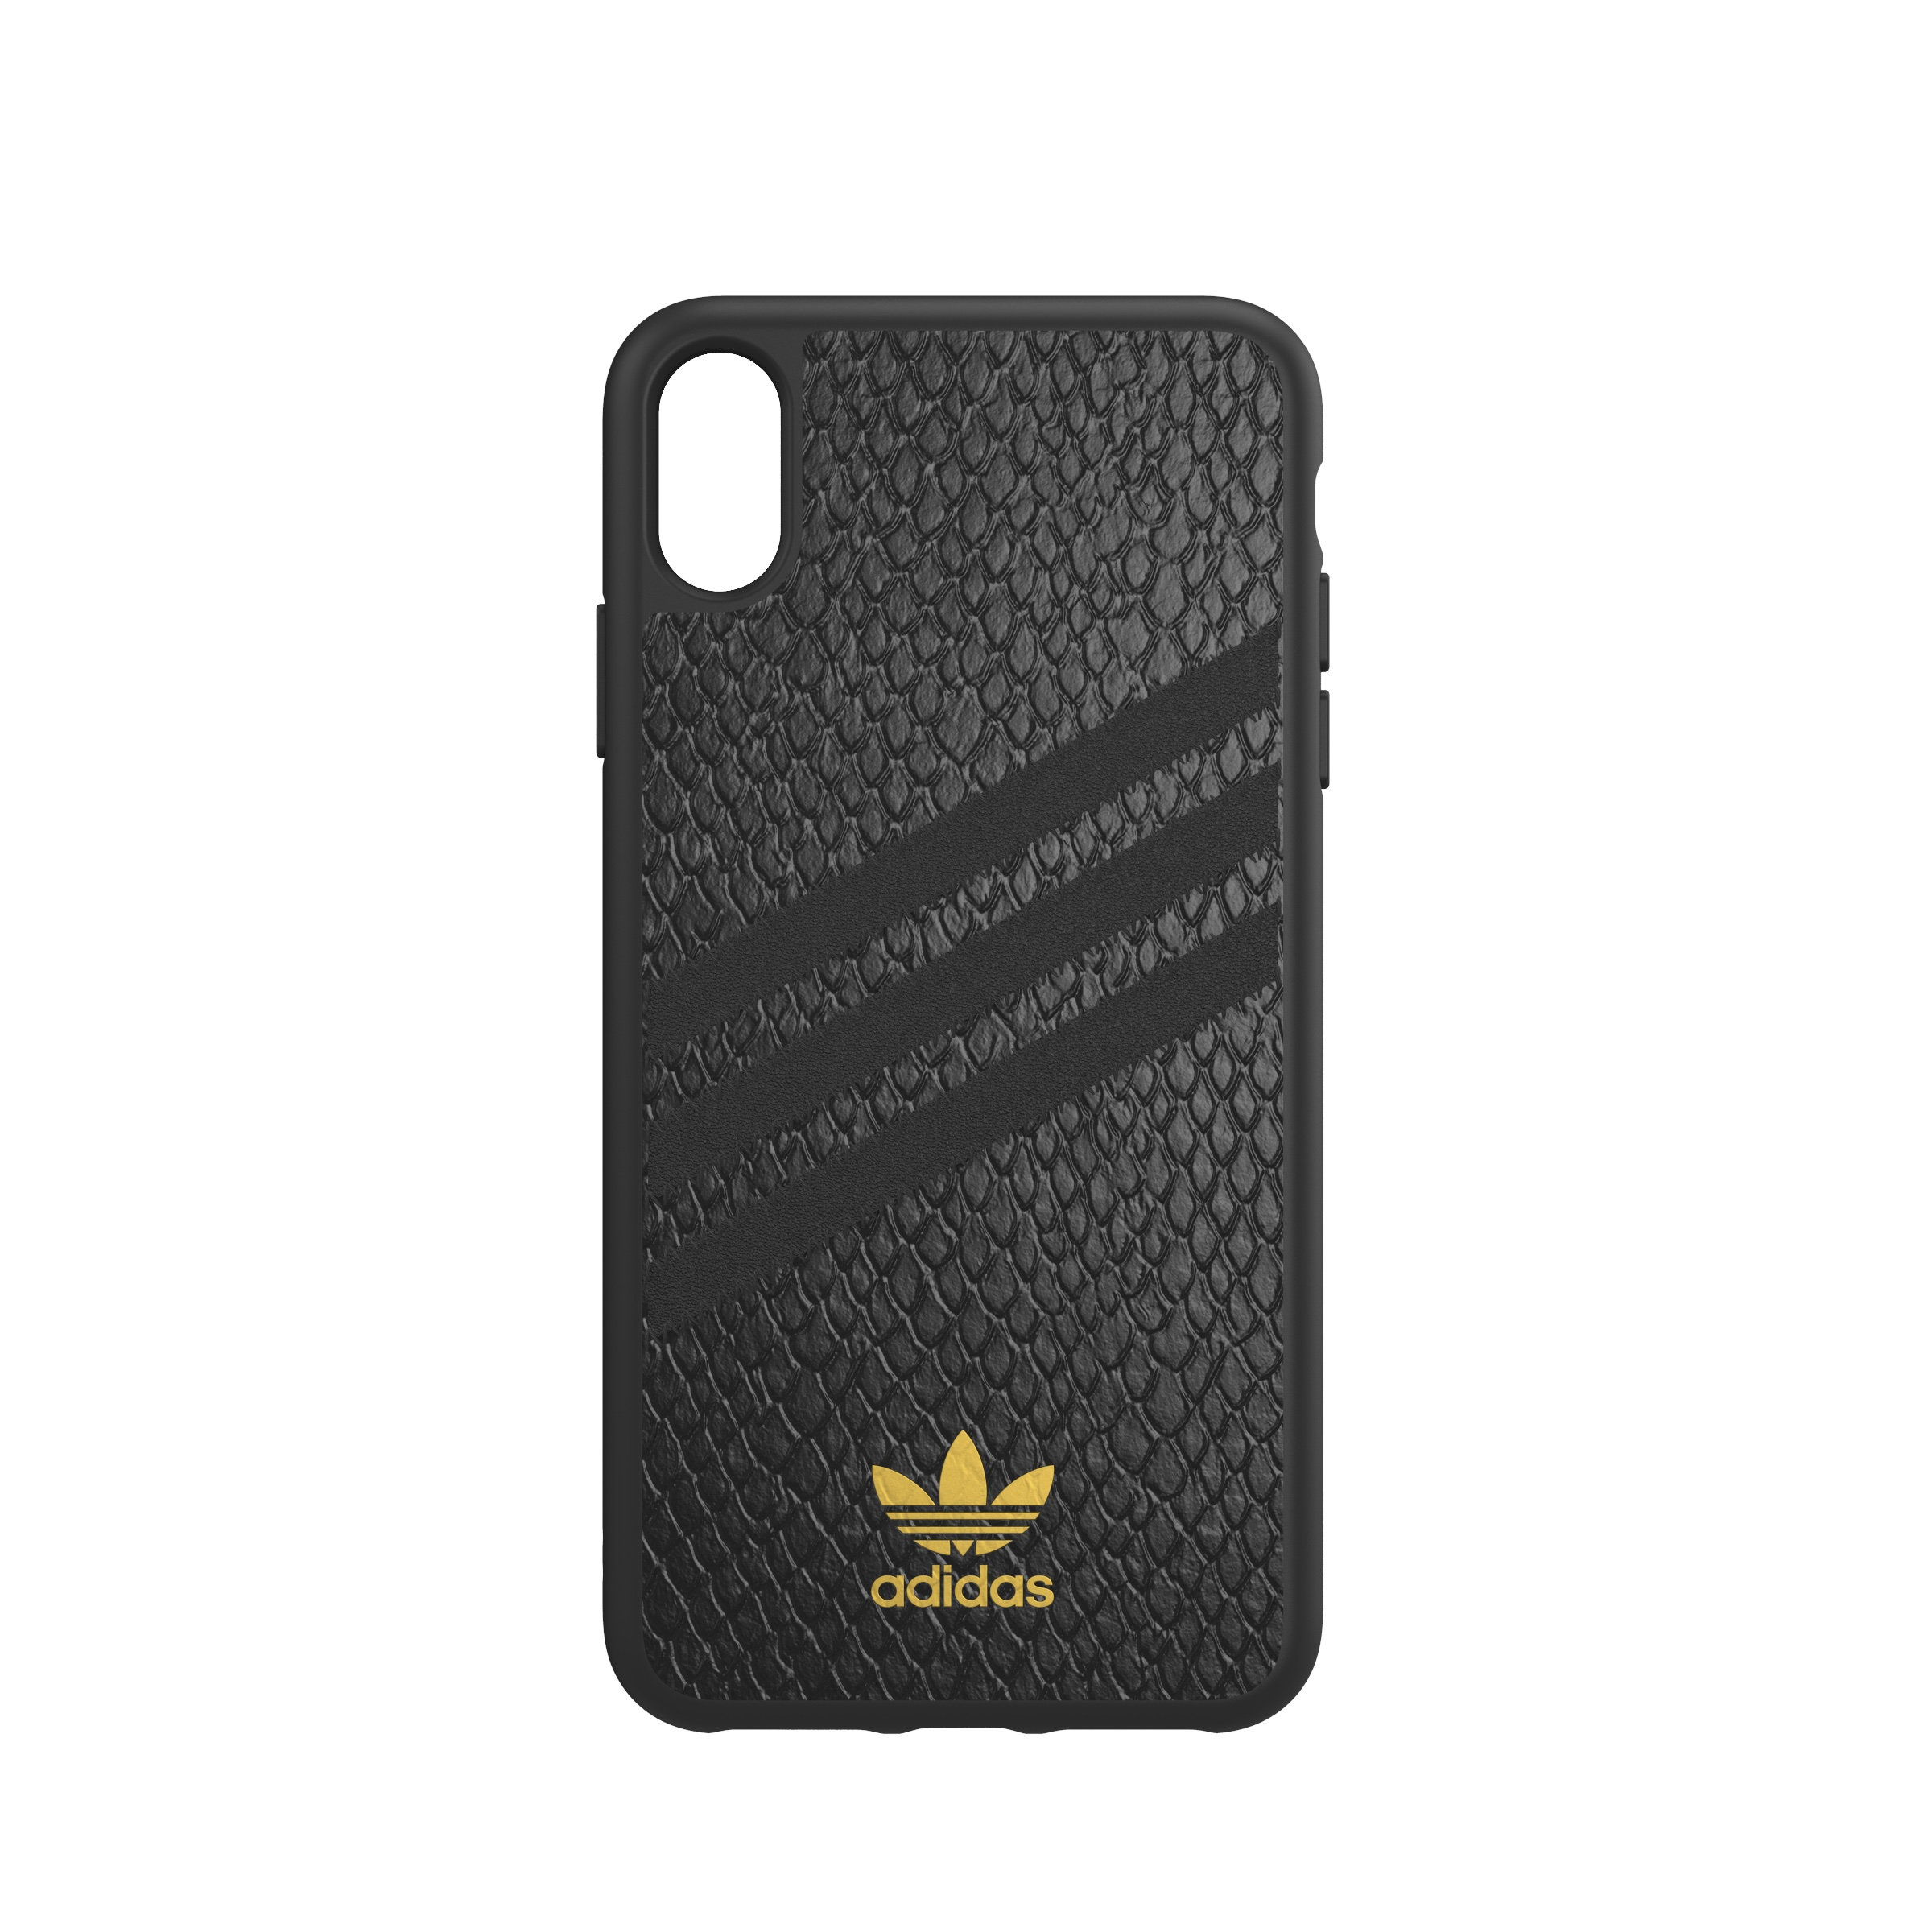 ADIDAS Moulded Case Backcover, XS BLACK MAX, APPLE, SNAKE, PU IPHONE